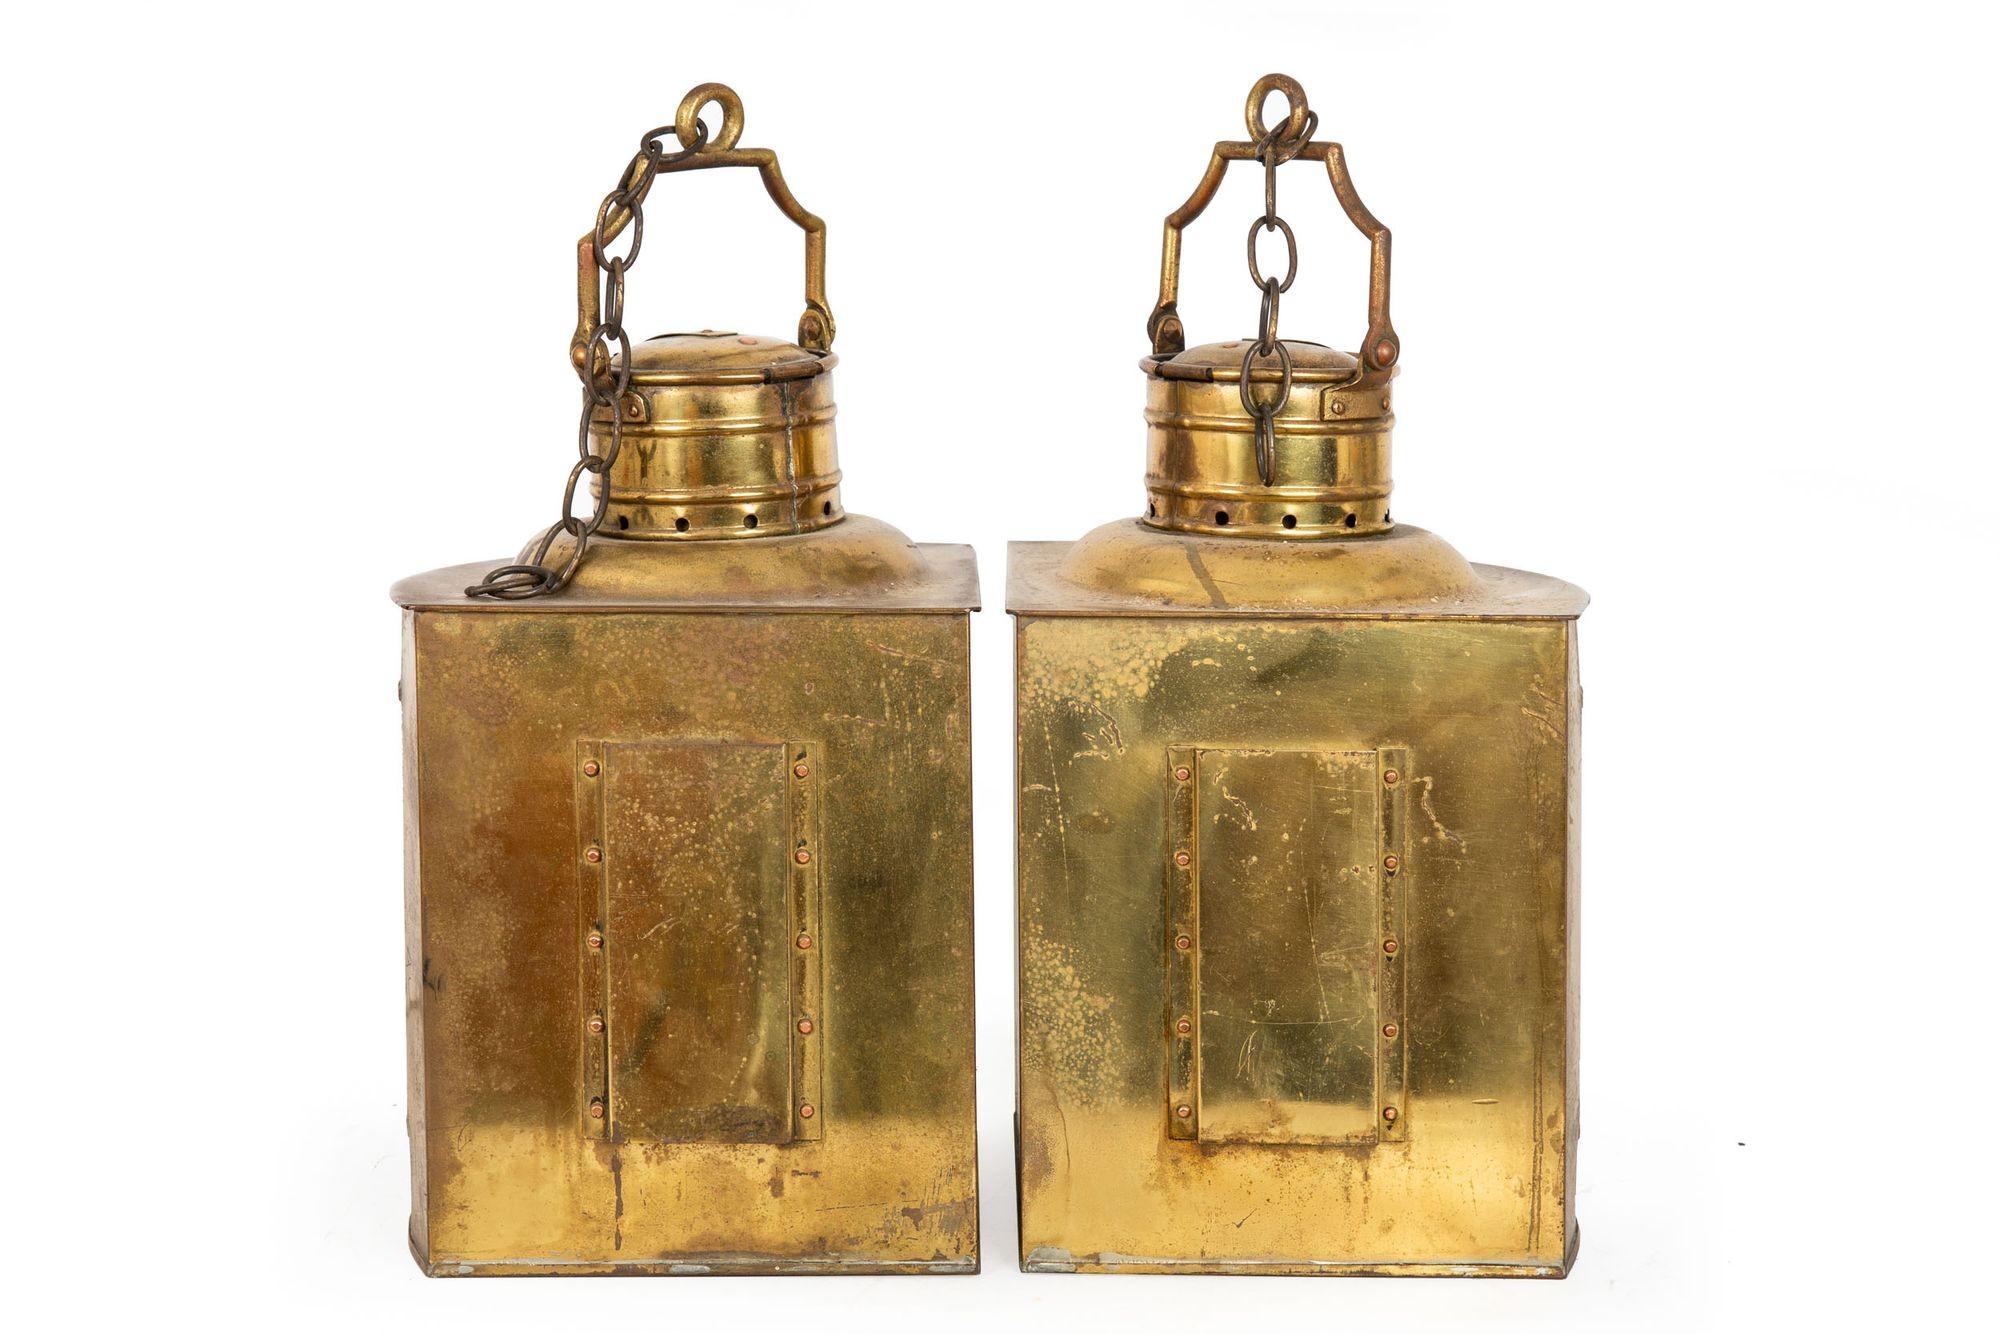 PAIR OF ANTIQUE BRASS SHIP'S LANTERNS IN RED & GREEN FRESNEL LENS
England, circa 1900
Item # 301PAY23Z 

A wonderful aged pair of brass ship's lanterns with original red and green fresnel lenses from the turn of the century, each features a